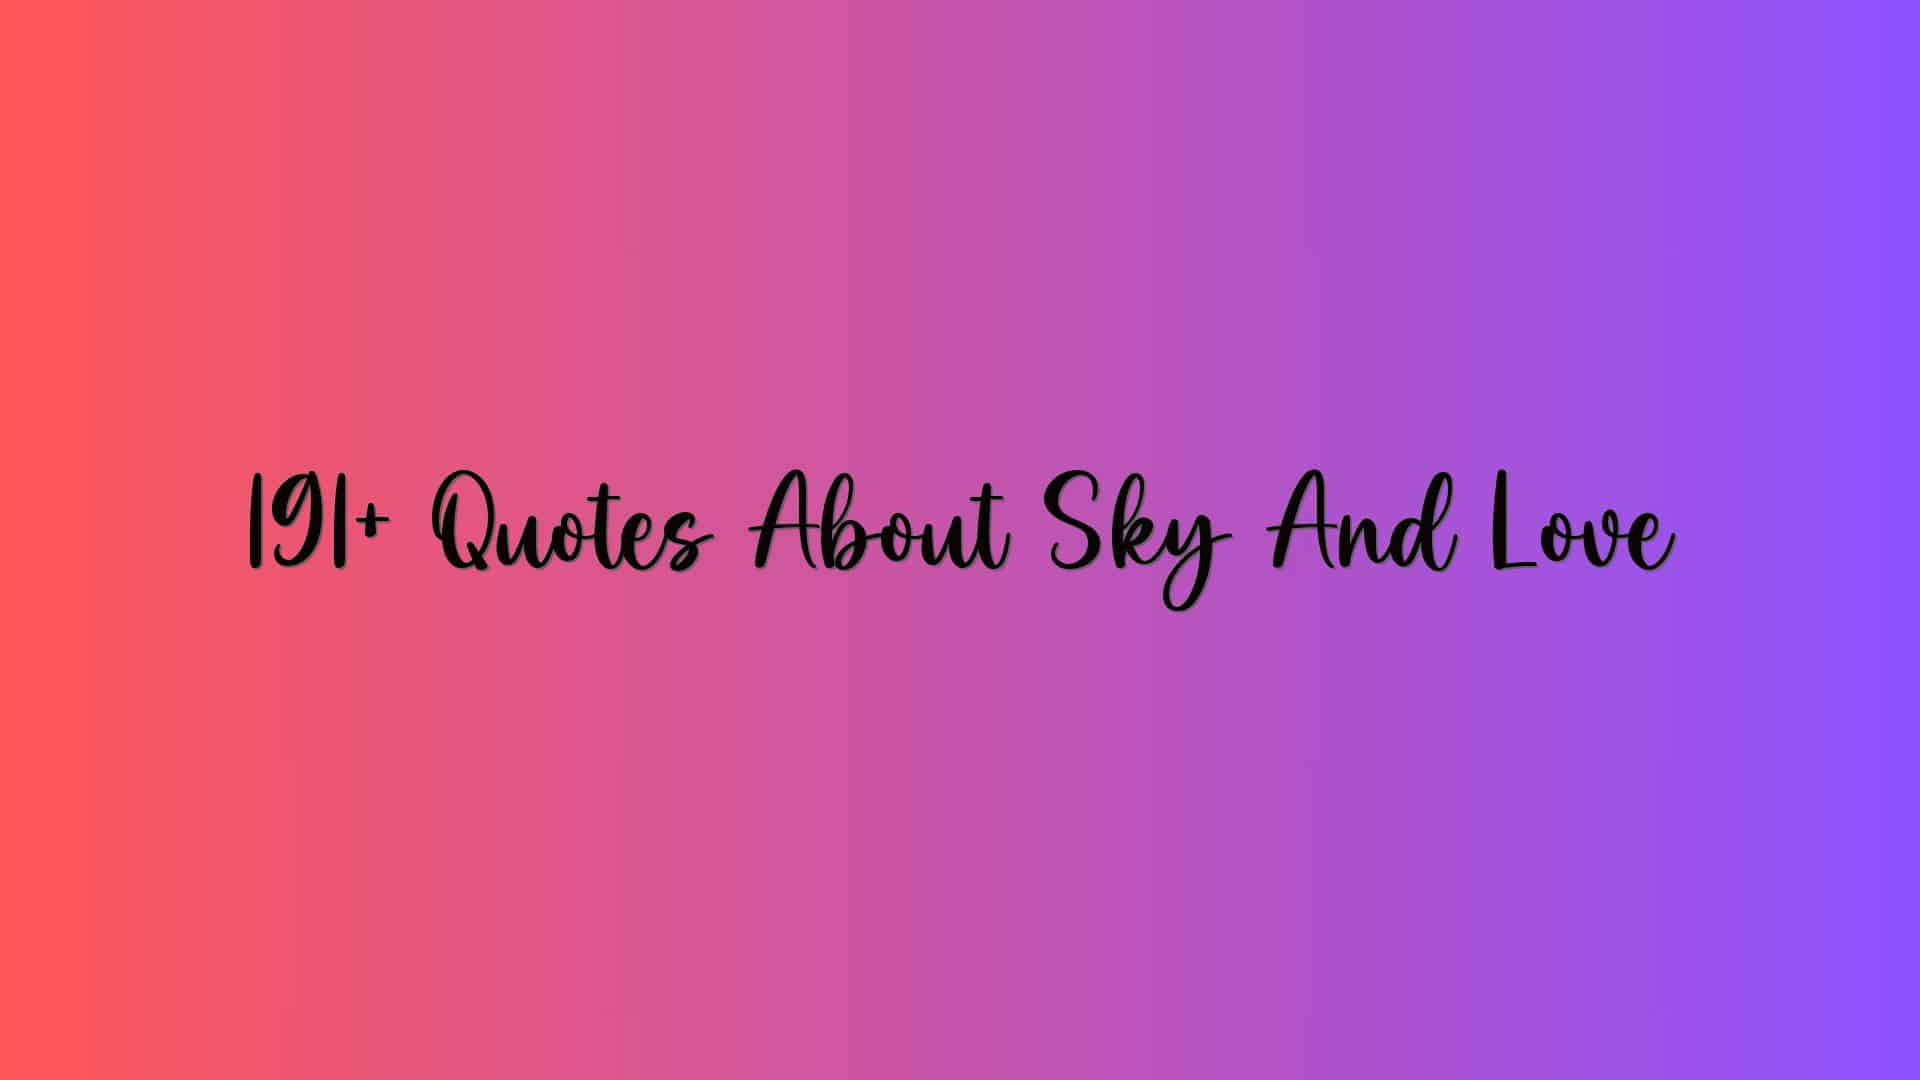 191+ Quotes About Sky And Love